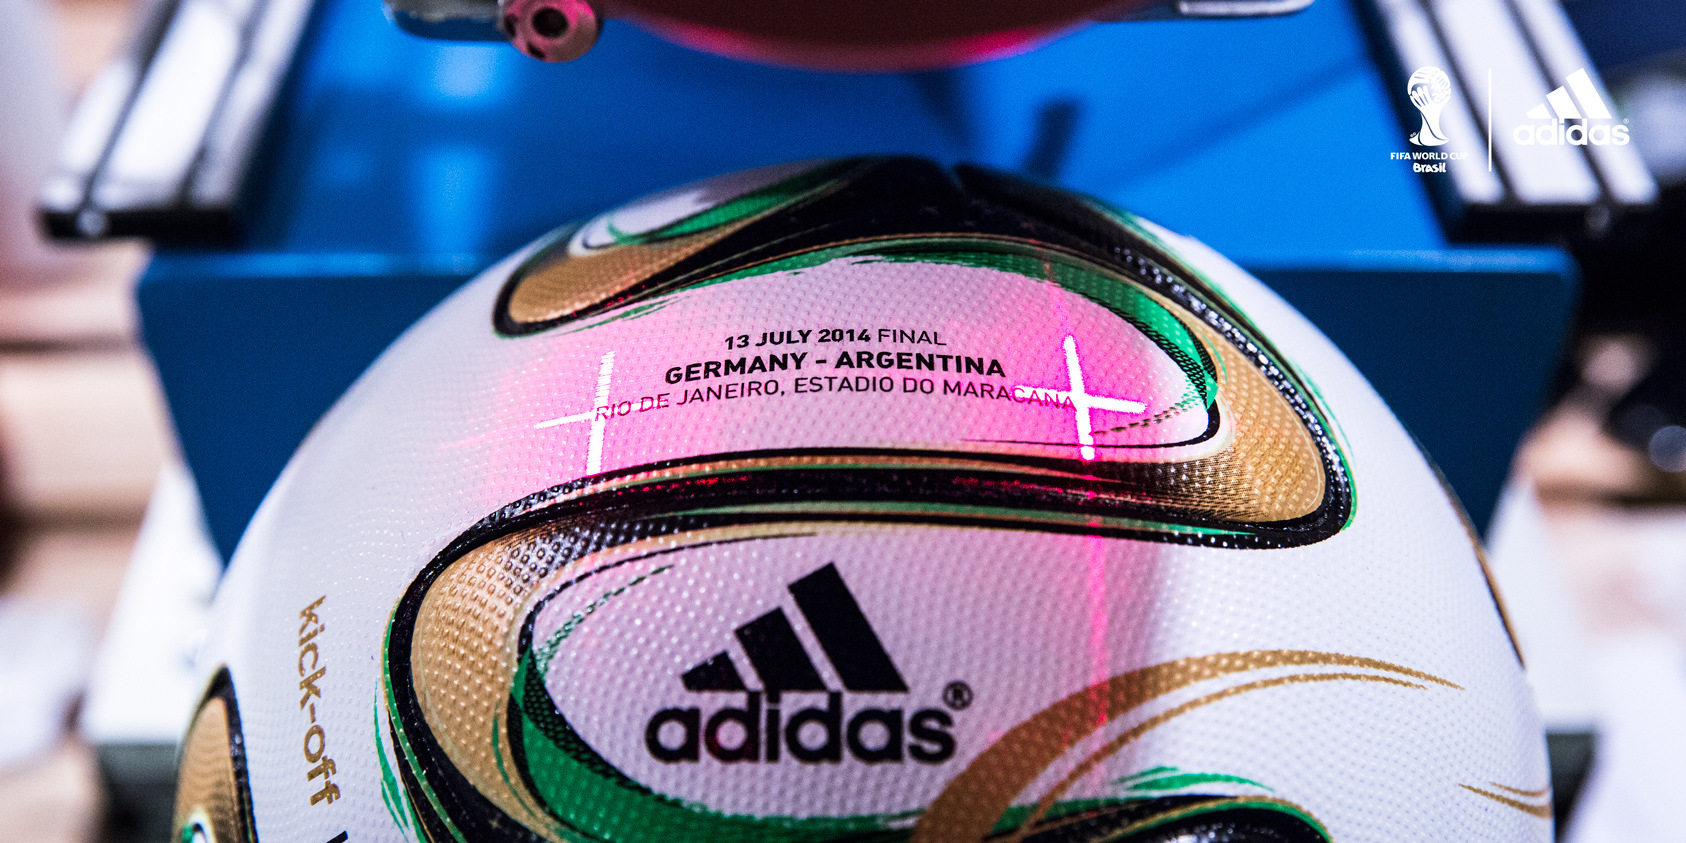 Adidas Brazuca: 2014 World Cup Ball Unveiled + Final Ball Leaked